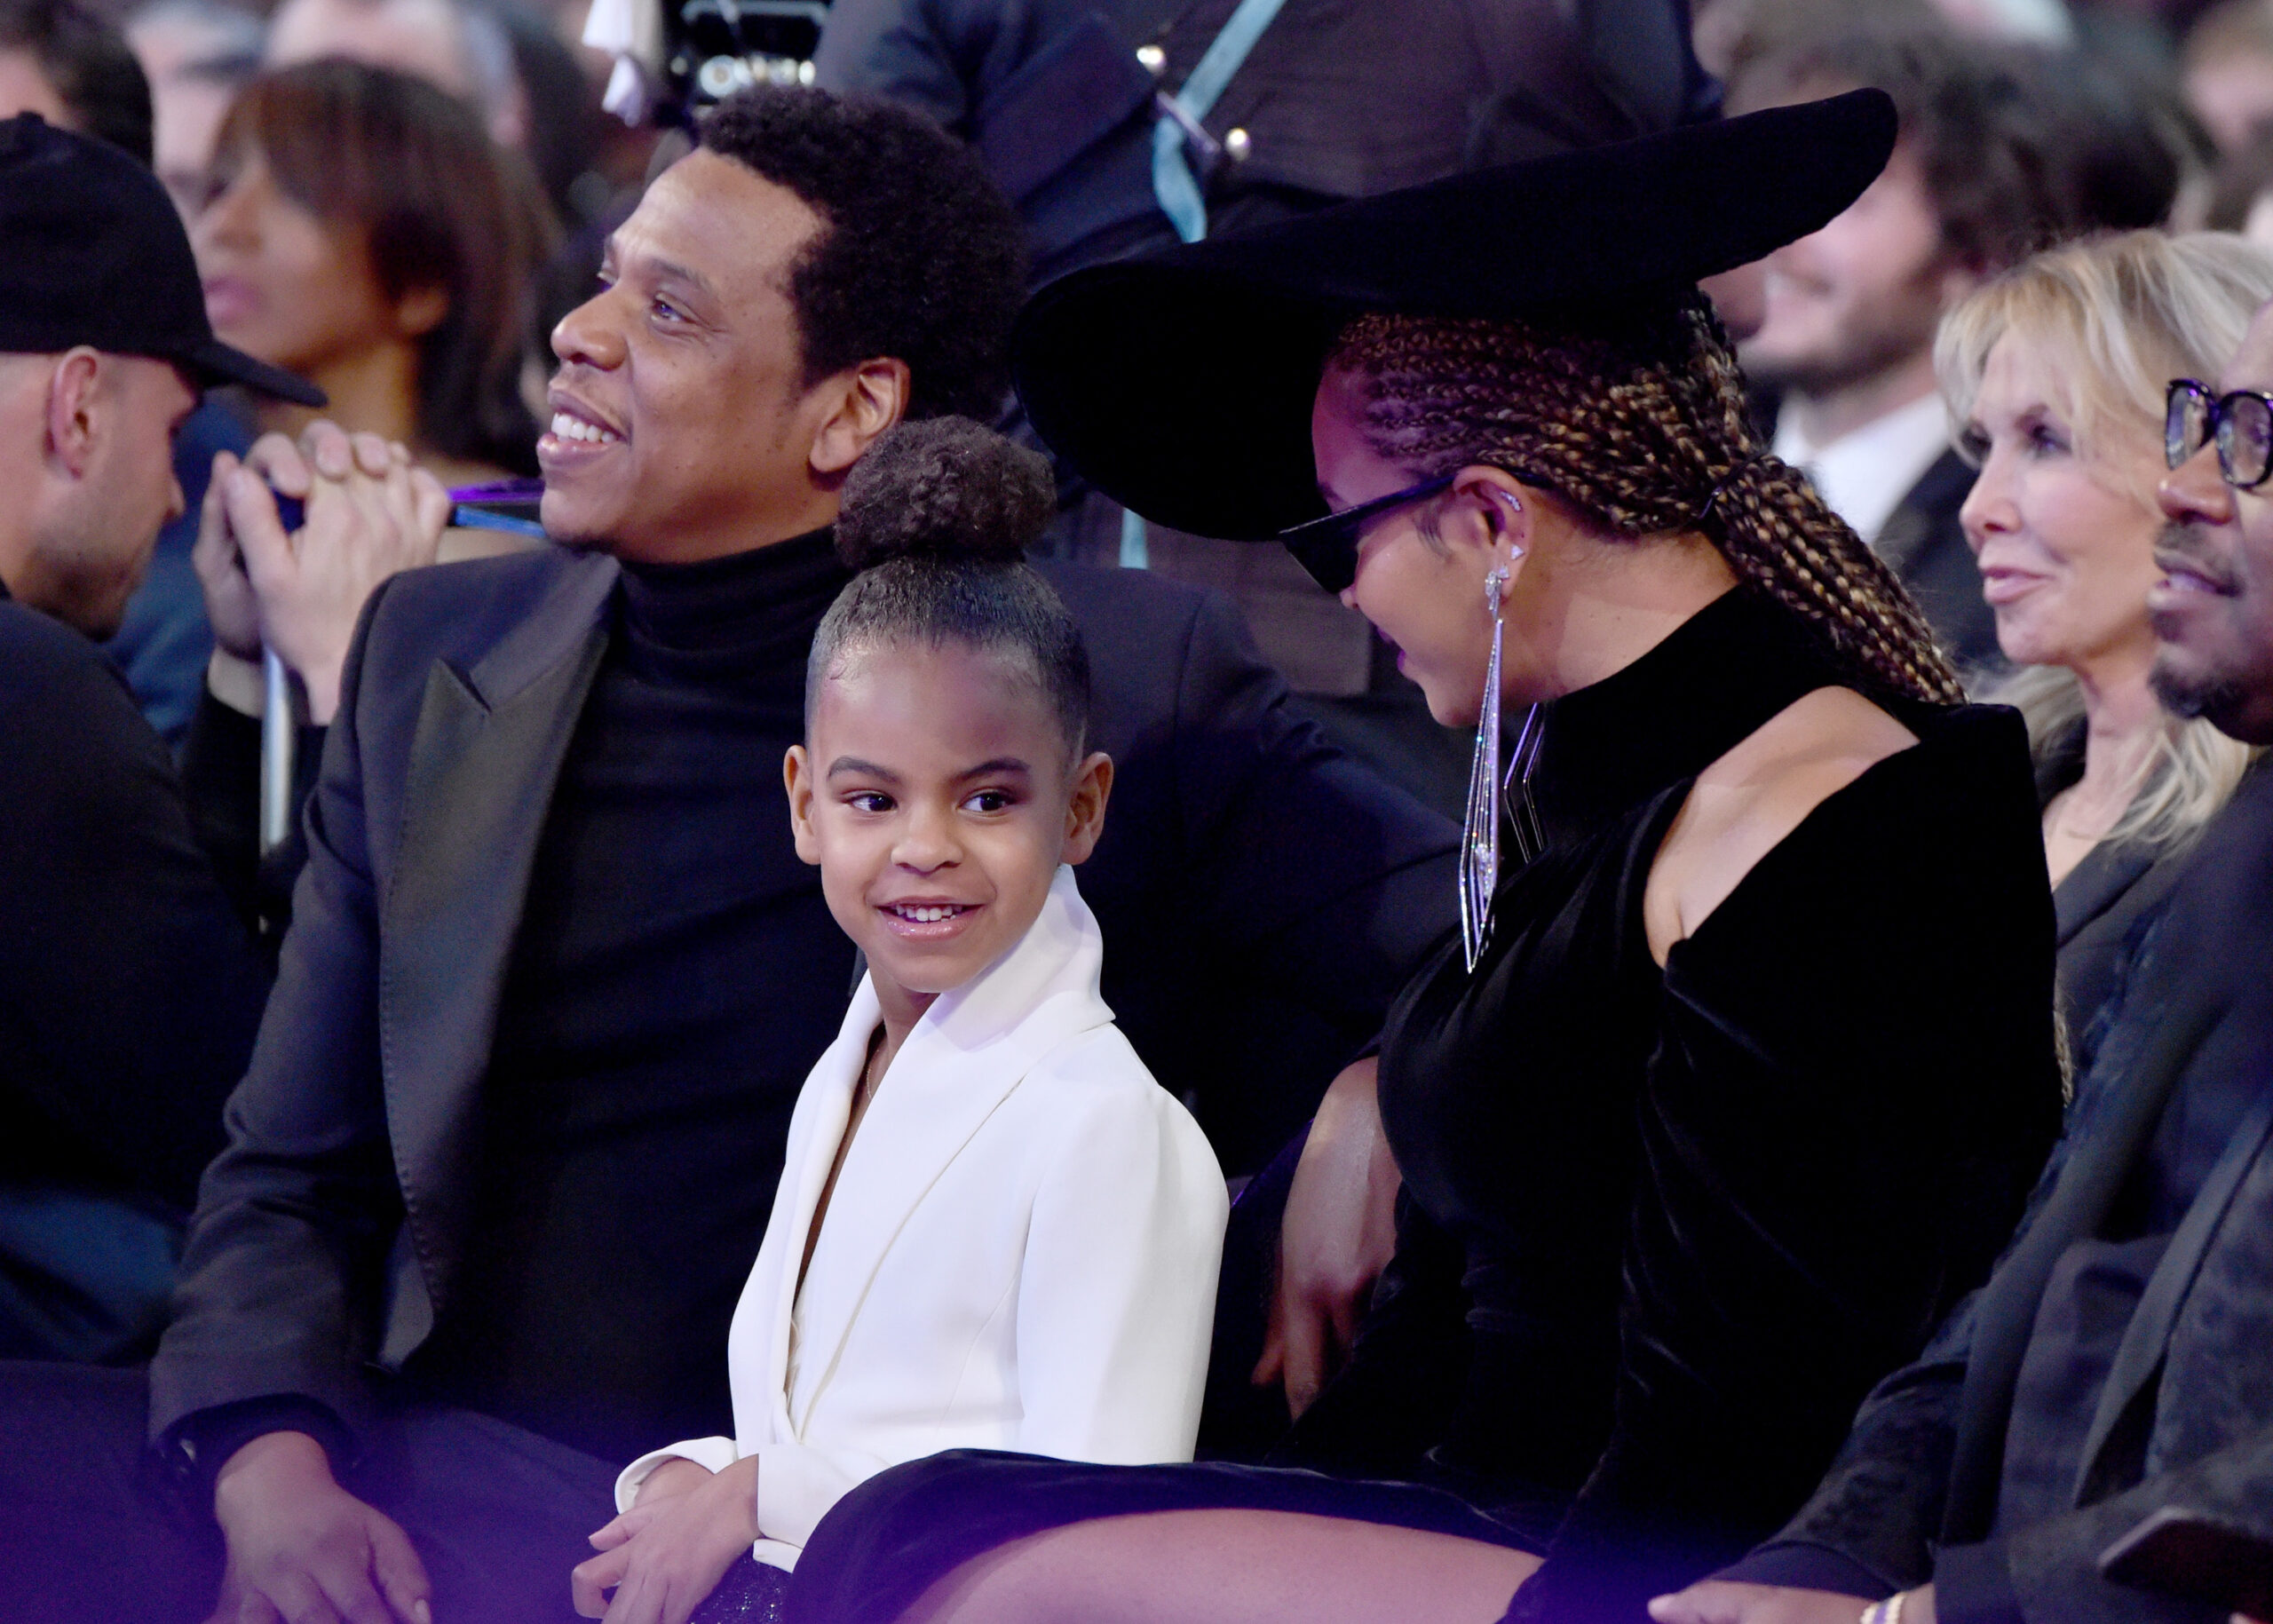 Blue Ivy Casually Bids $19K of Her Parents' Money on Art